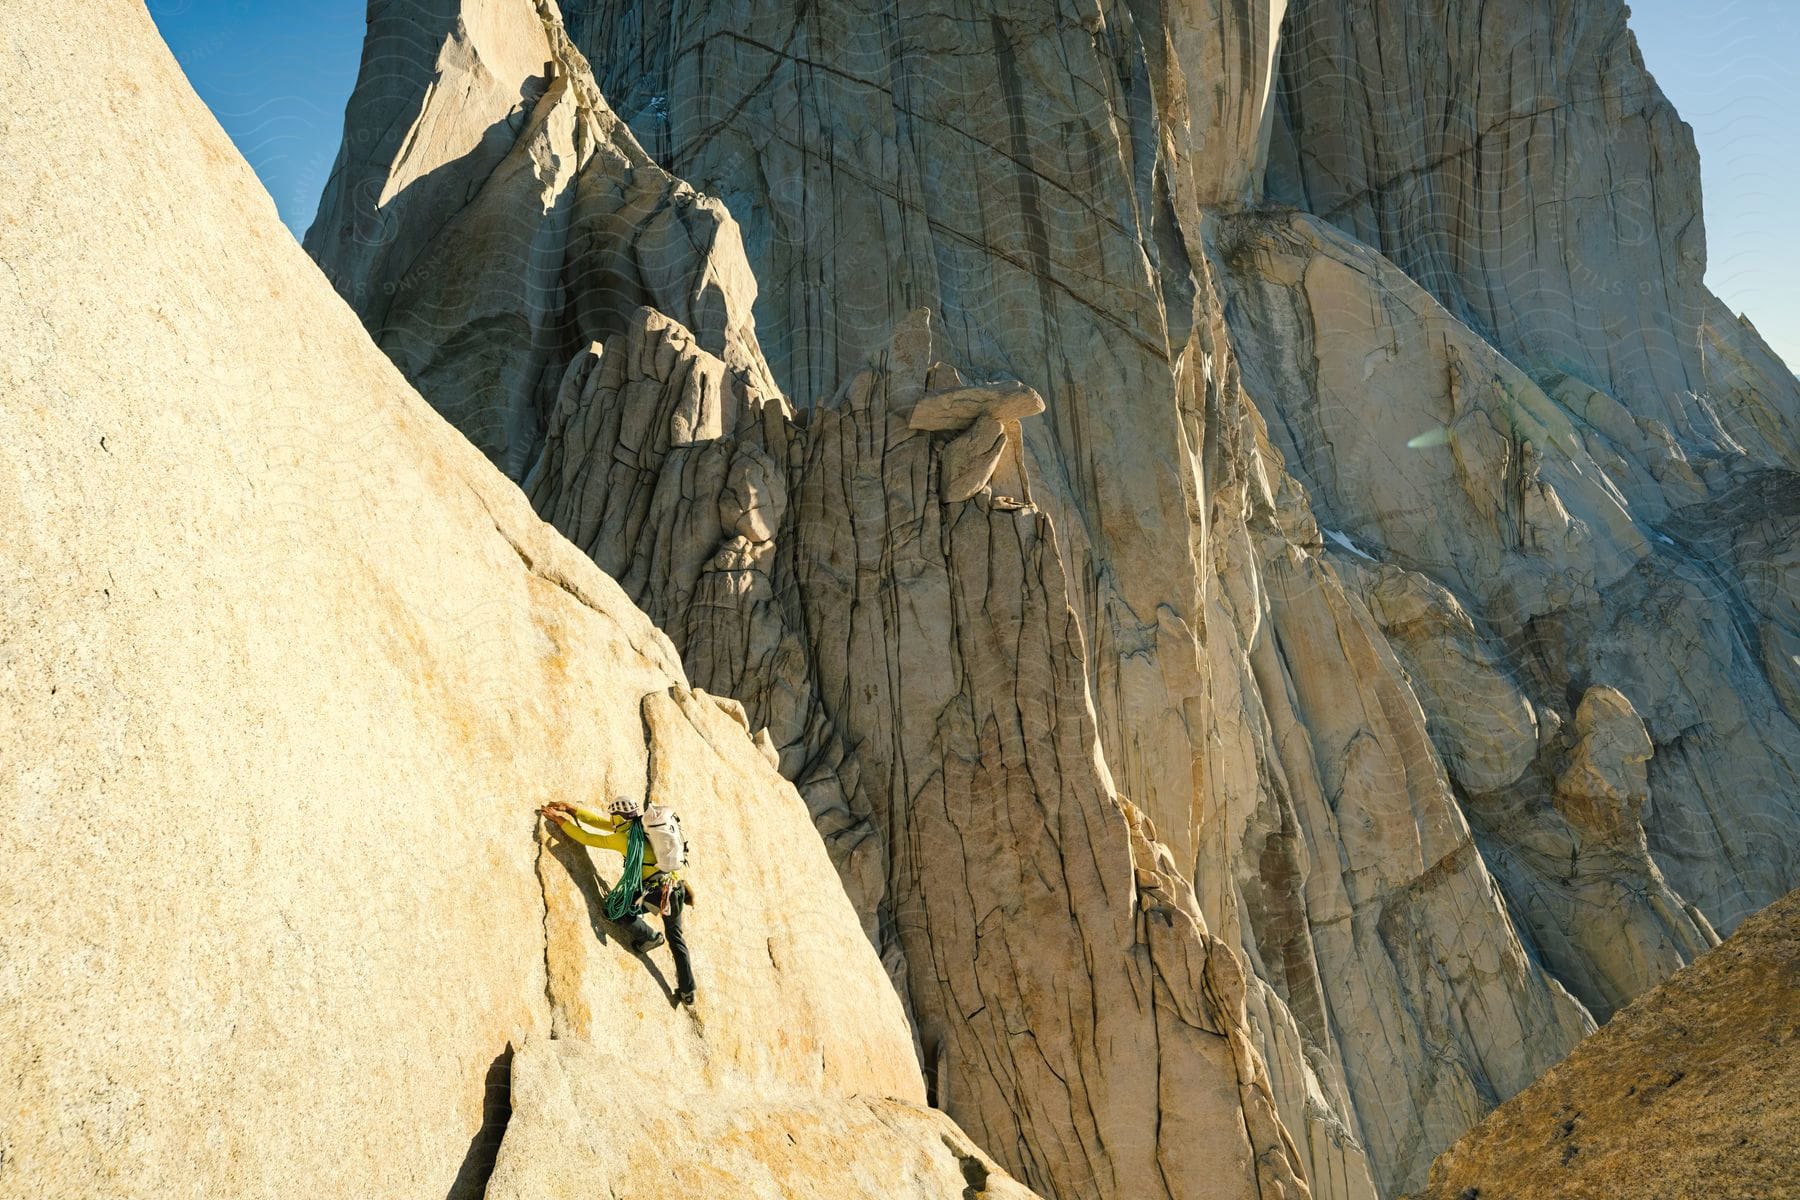 Rock climber prepares for next move on steep mountainside with another tall mountain behind